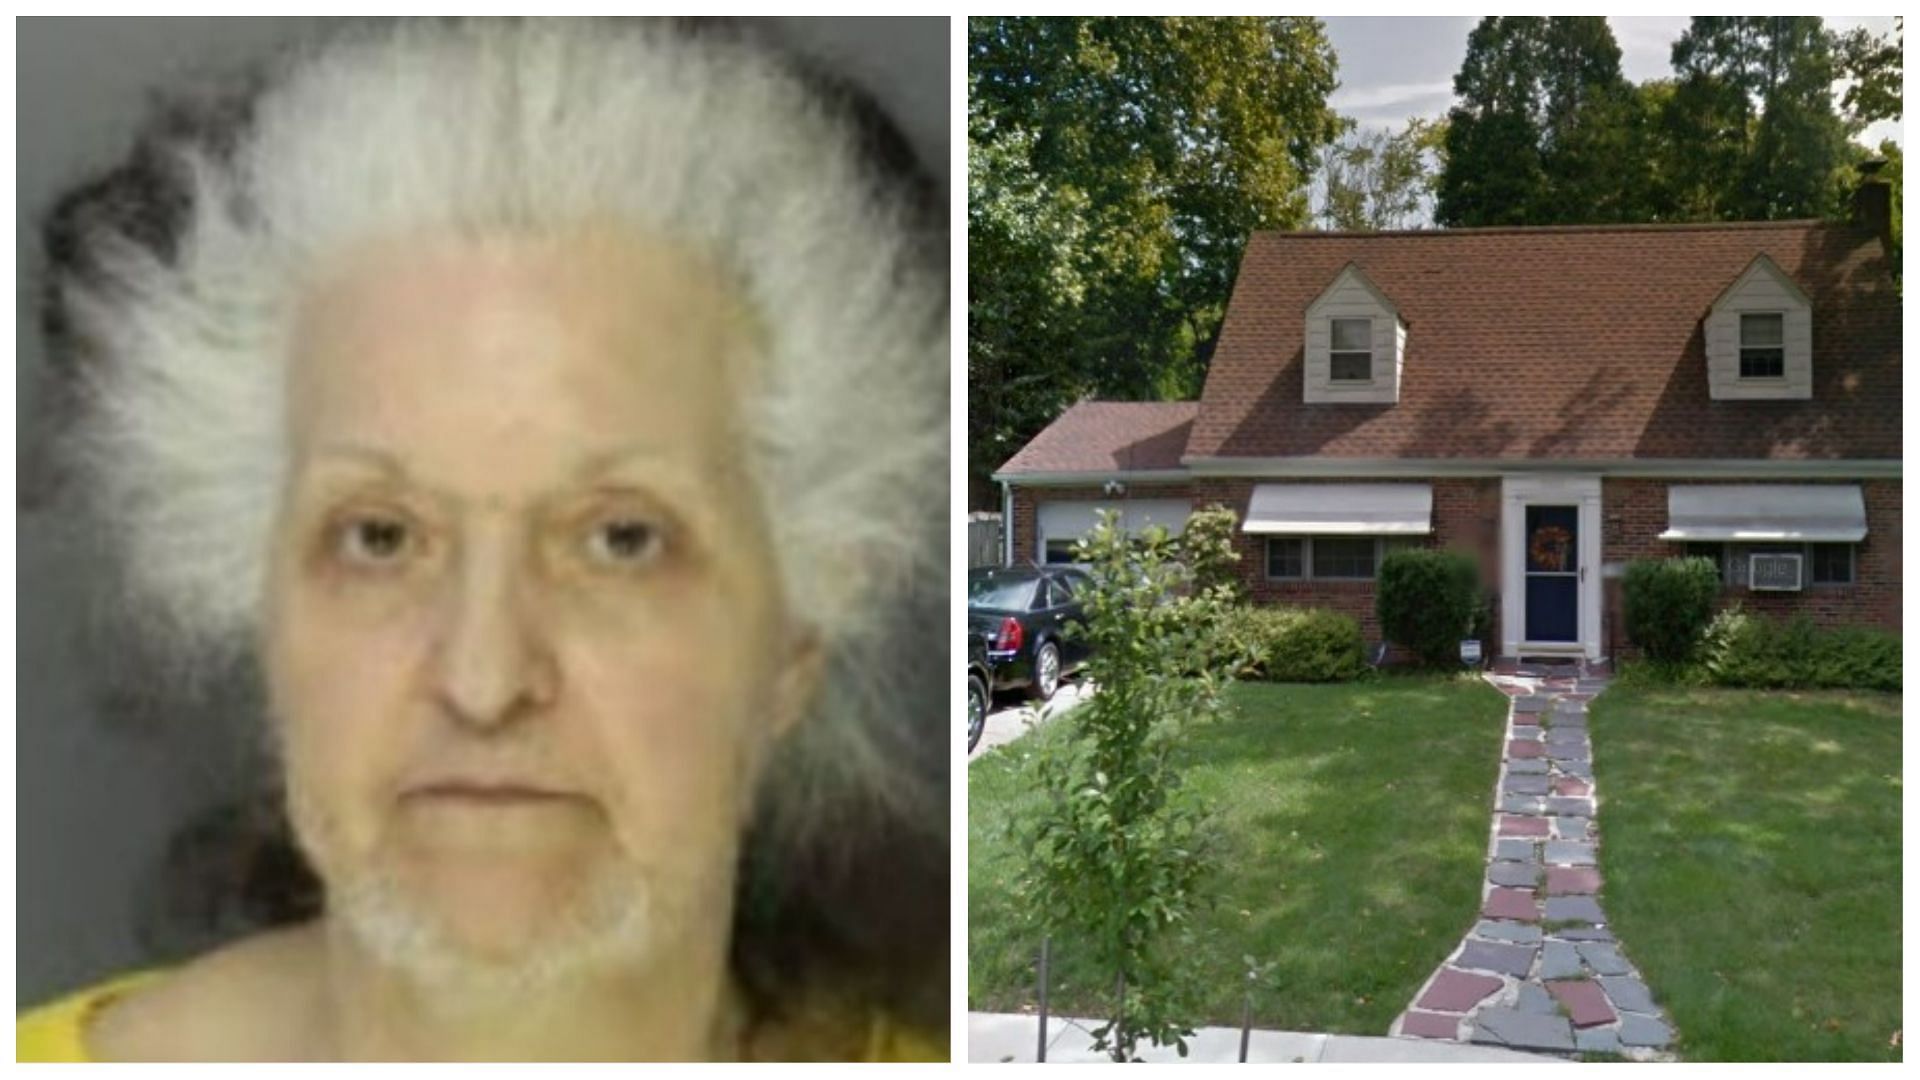 Evelyn Henderson charged for allegedly killing her husband in their home (Image via Susquehanna Township police department/Google Maps)